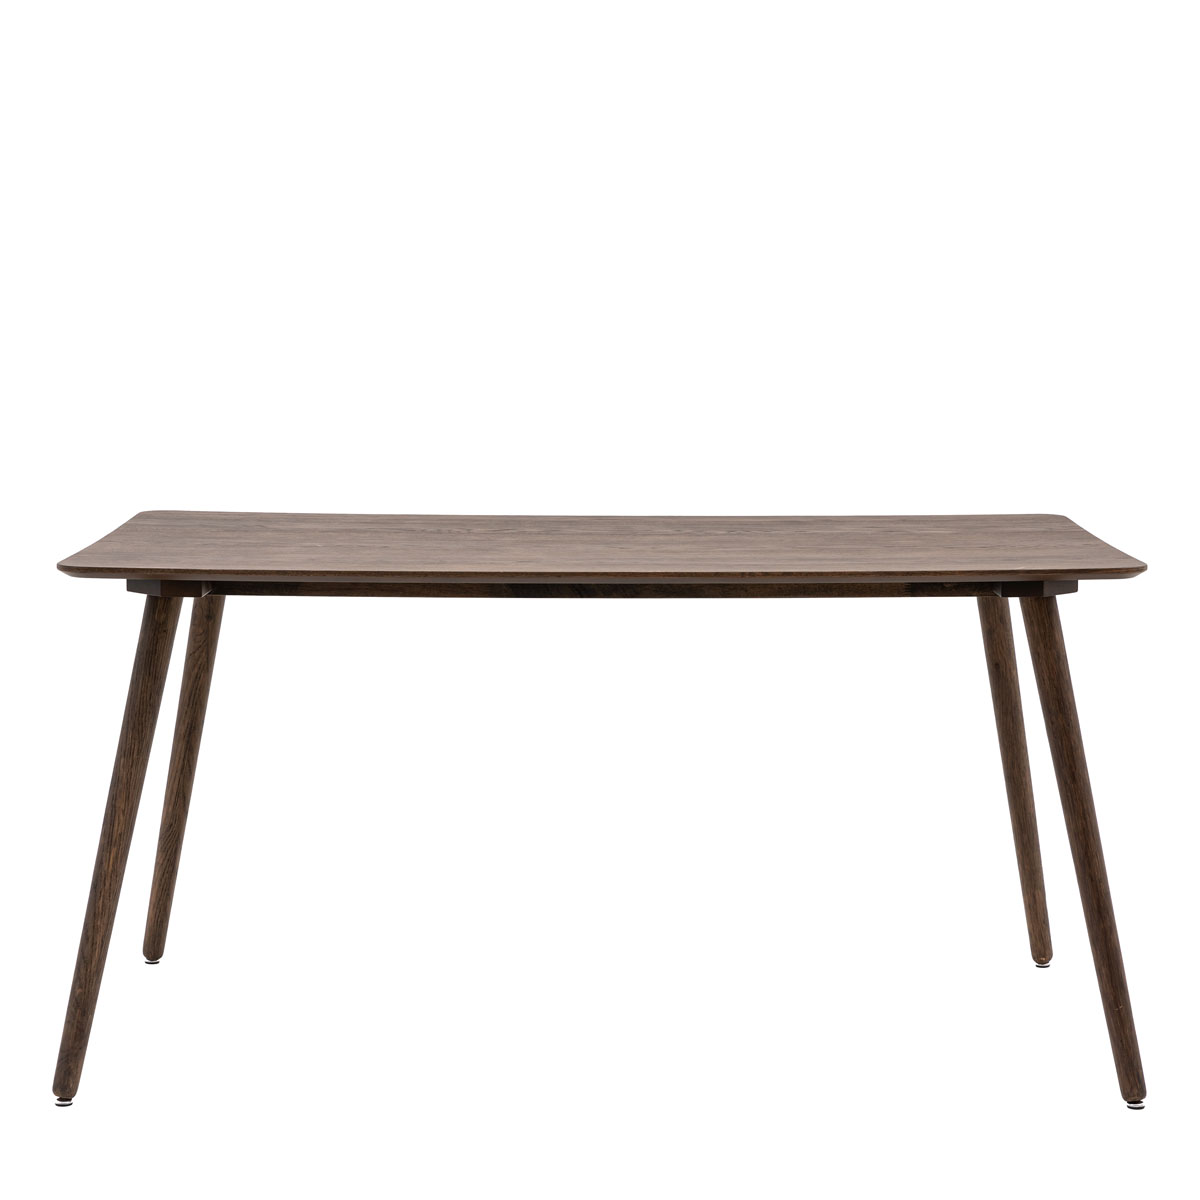 Hatfield Dining Table Smoked 1500x750x800mm